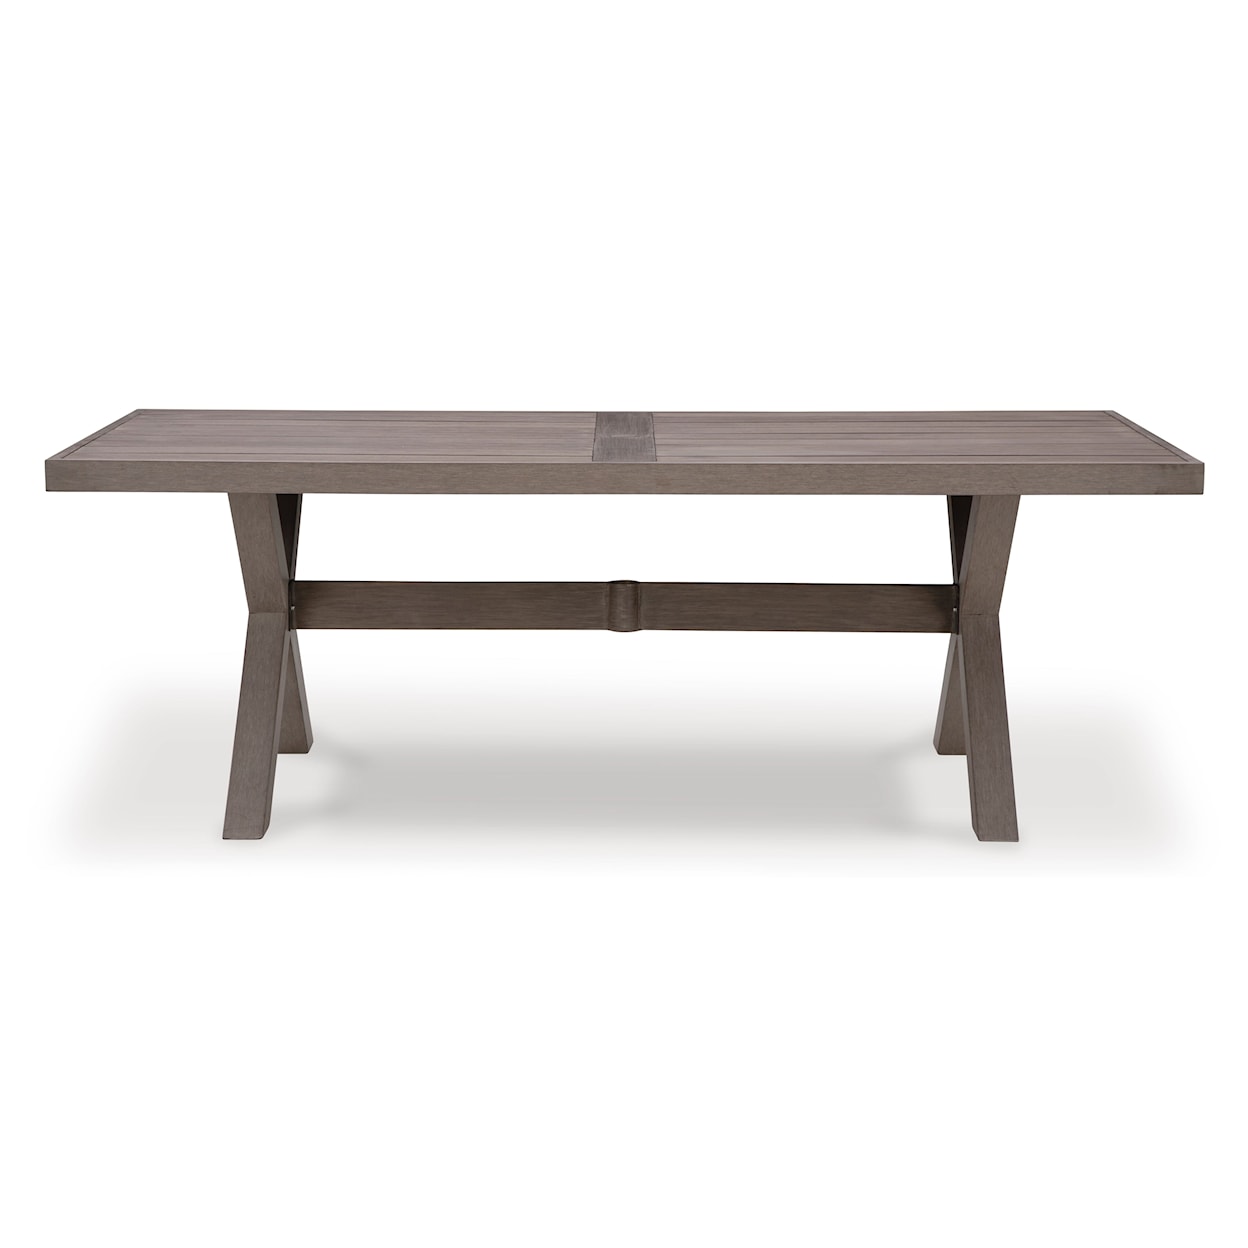 Signature Design by Ashley Hillside Barn RECT Dining Table w/UMB OPT